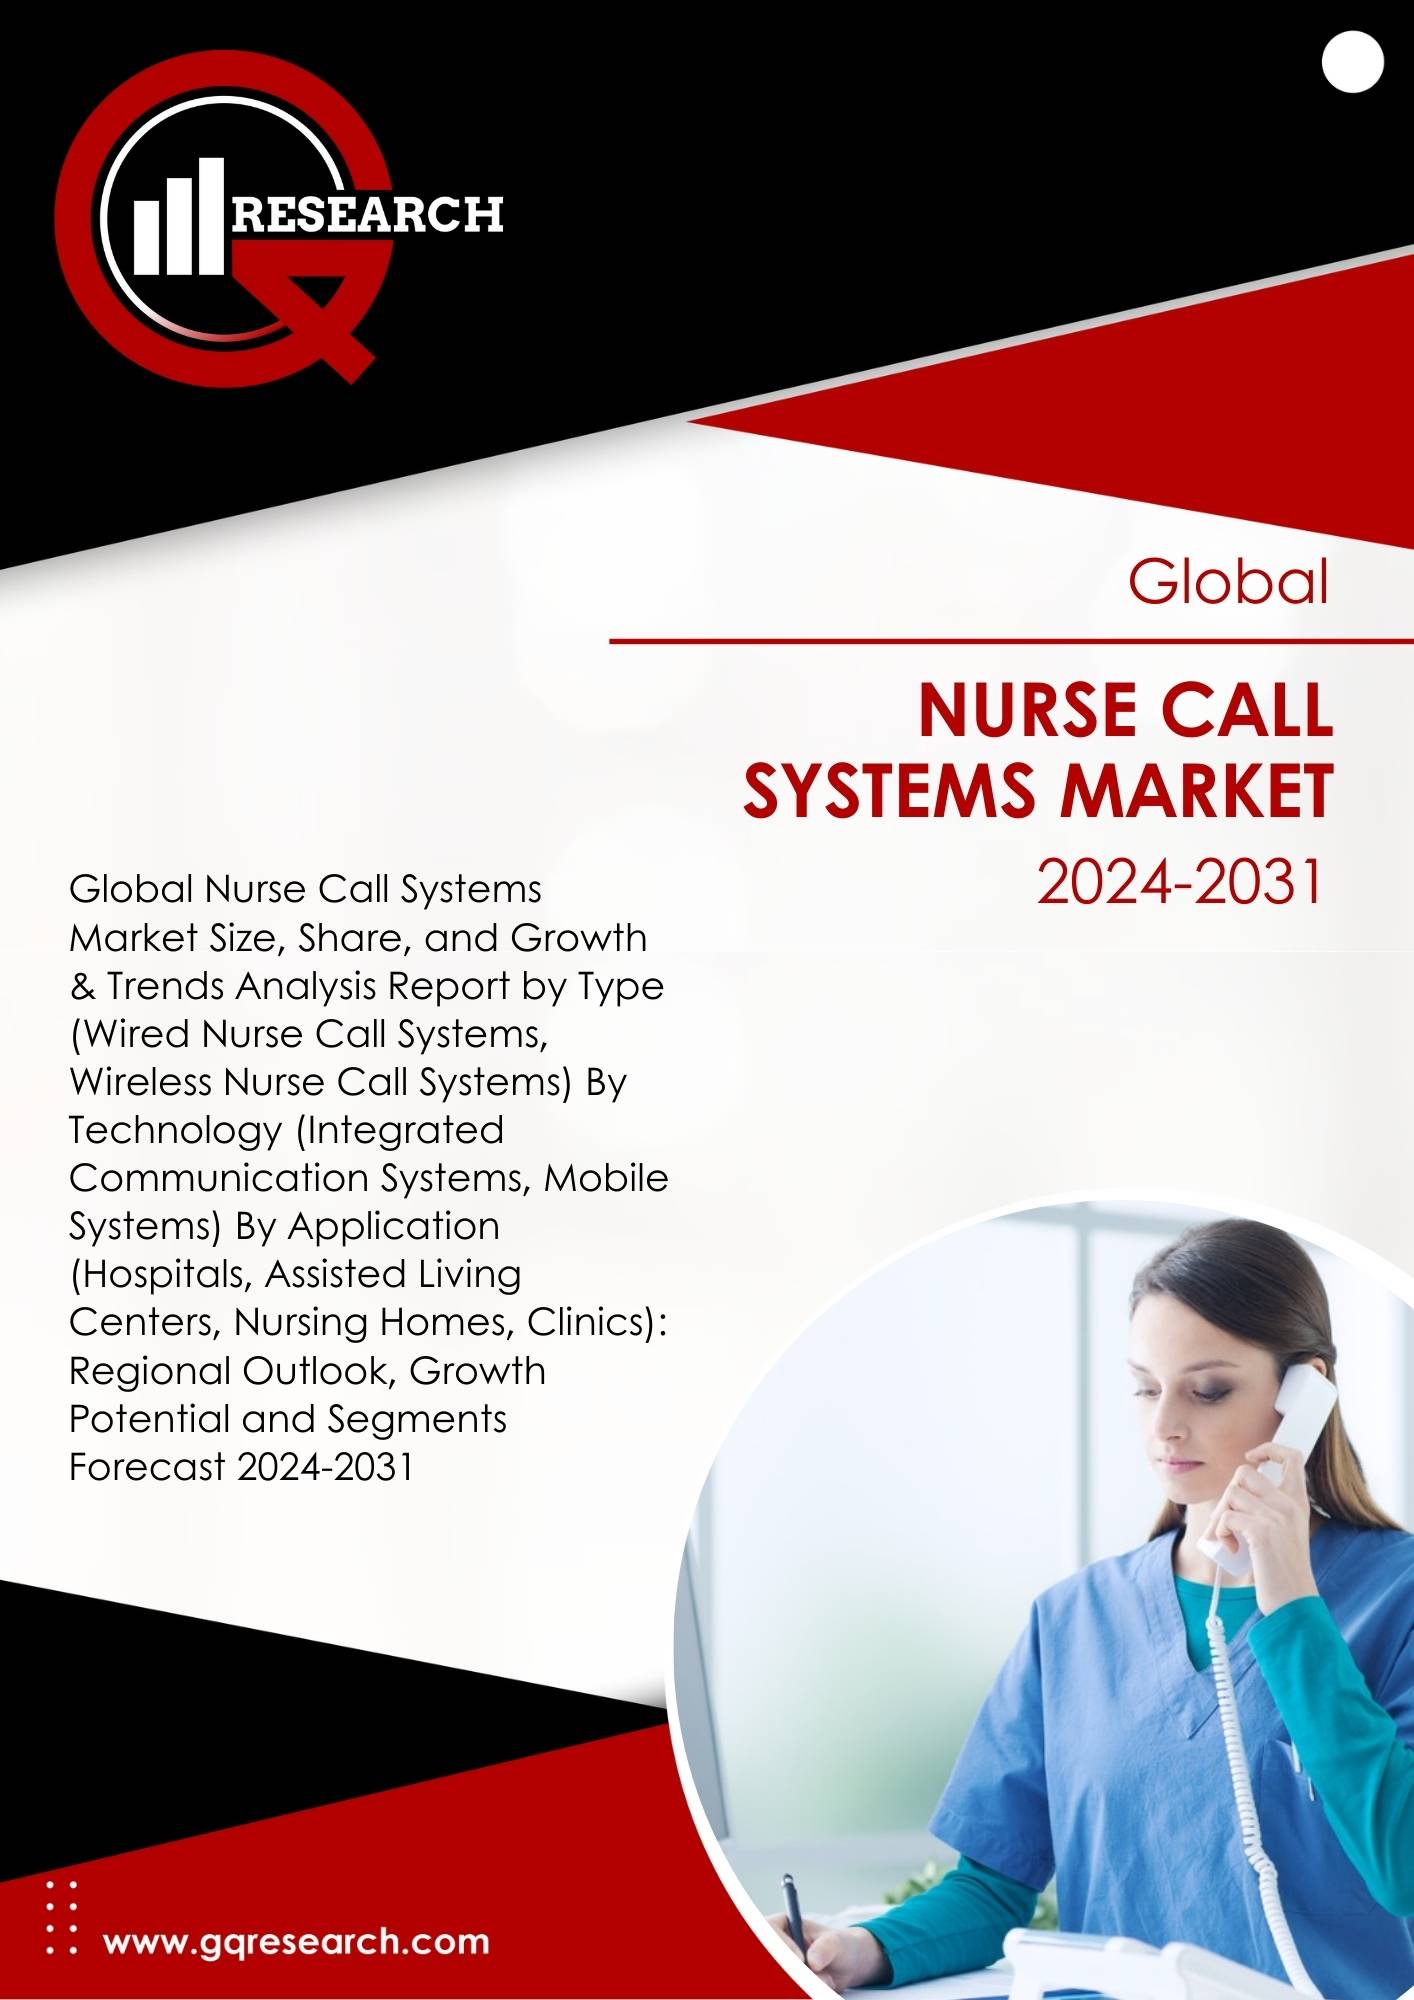 Nurse Call Systems Market Size, Share, Growth and Forecast to 2031 | GQ Research